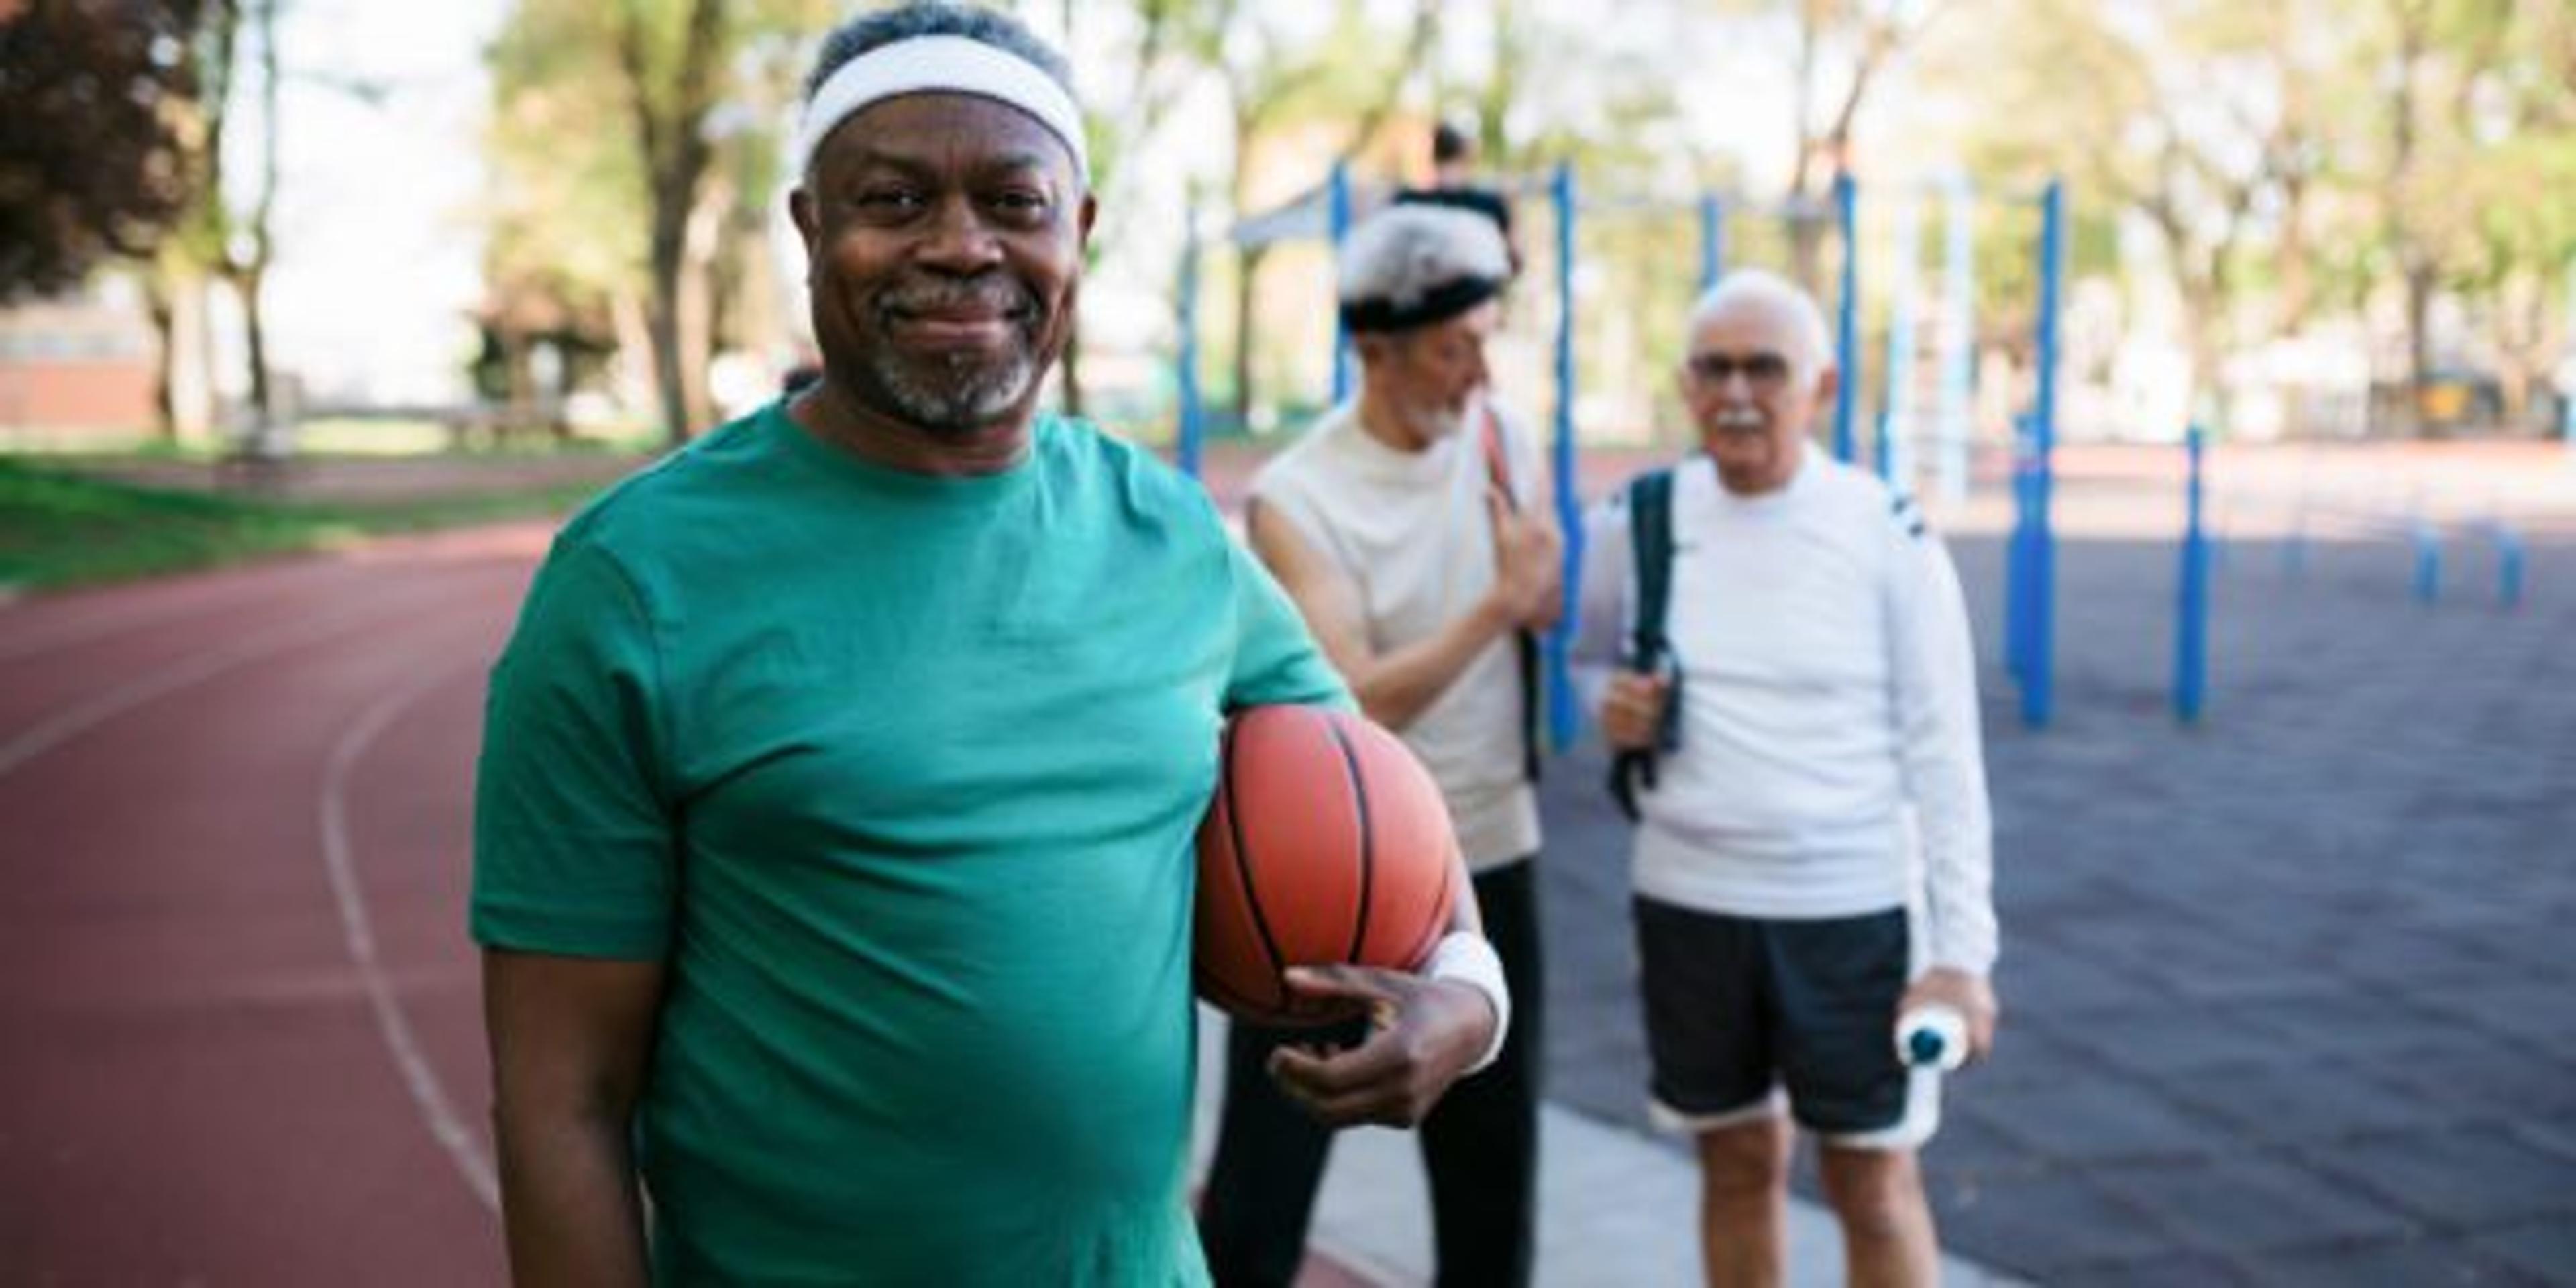 A Black man smiles at the camera holding a basketball as his friends look on from the park behind him.